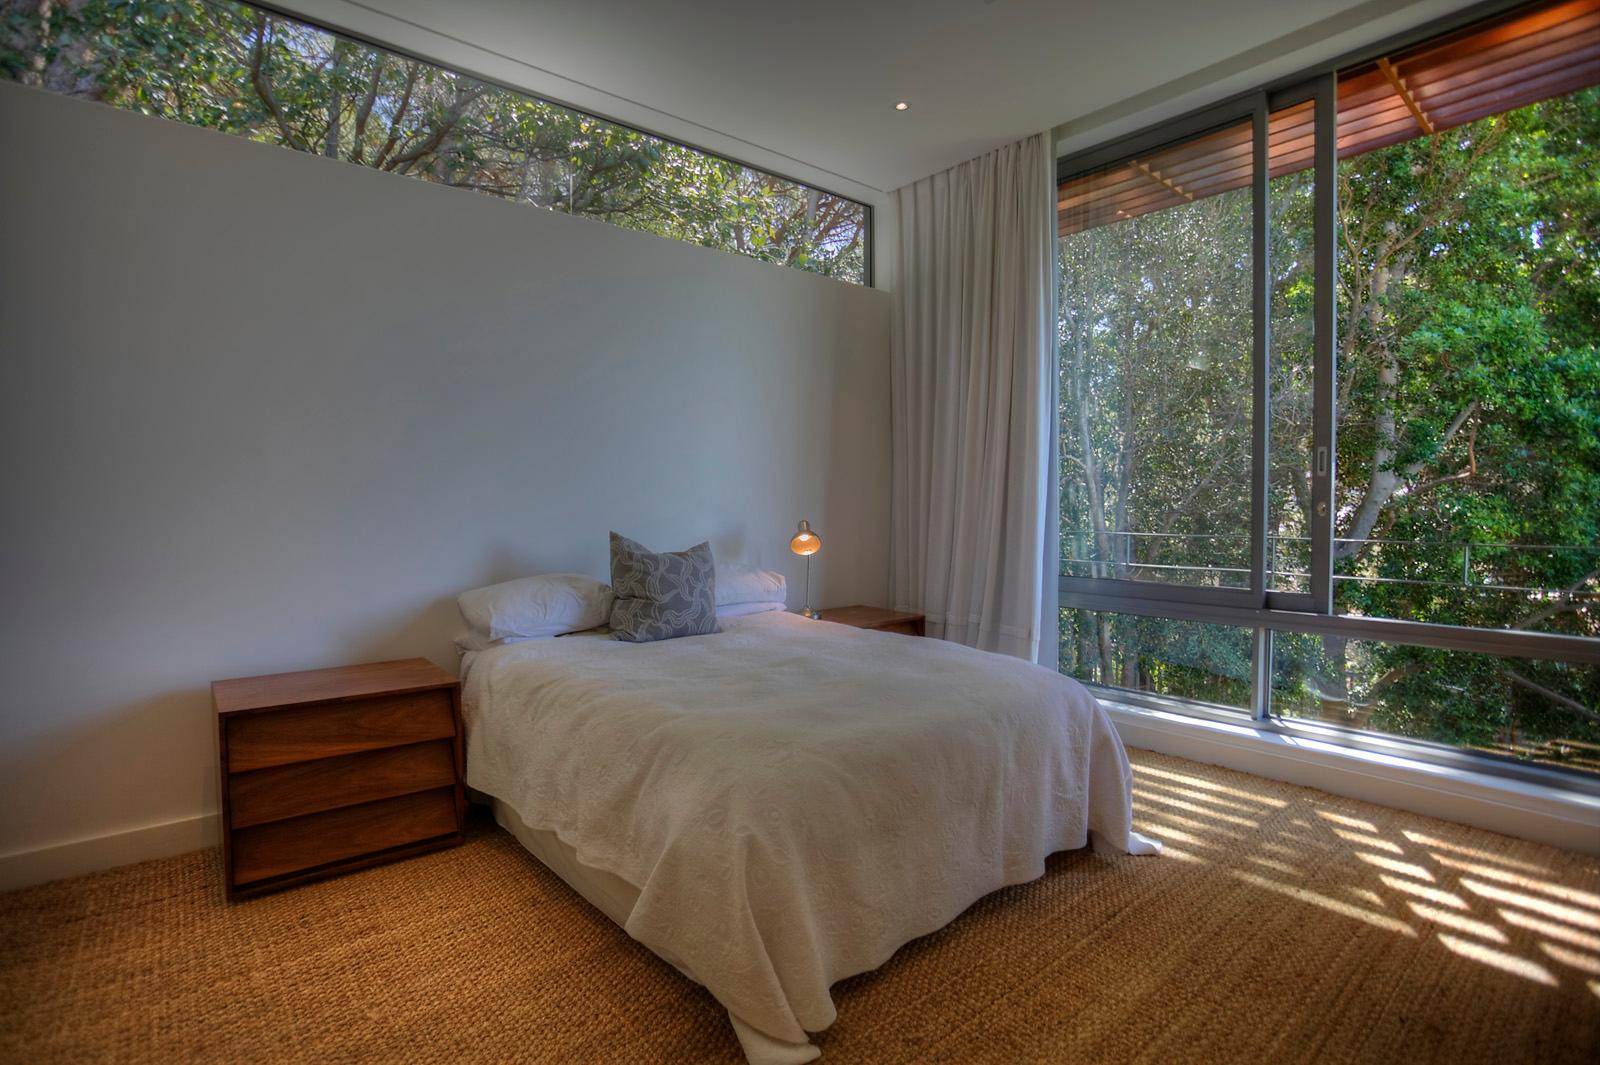 Photo 17 of Higgovale Chic accommodation in Higgovale, Cape Town with 5 bedrooms and 4.5 bathrooms